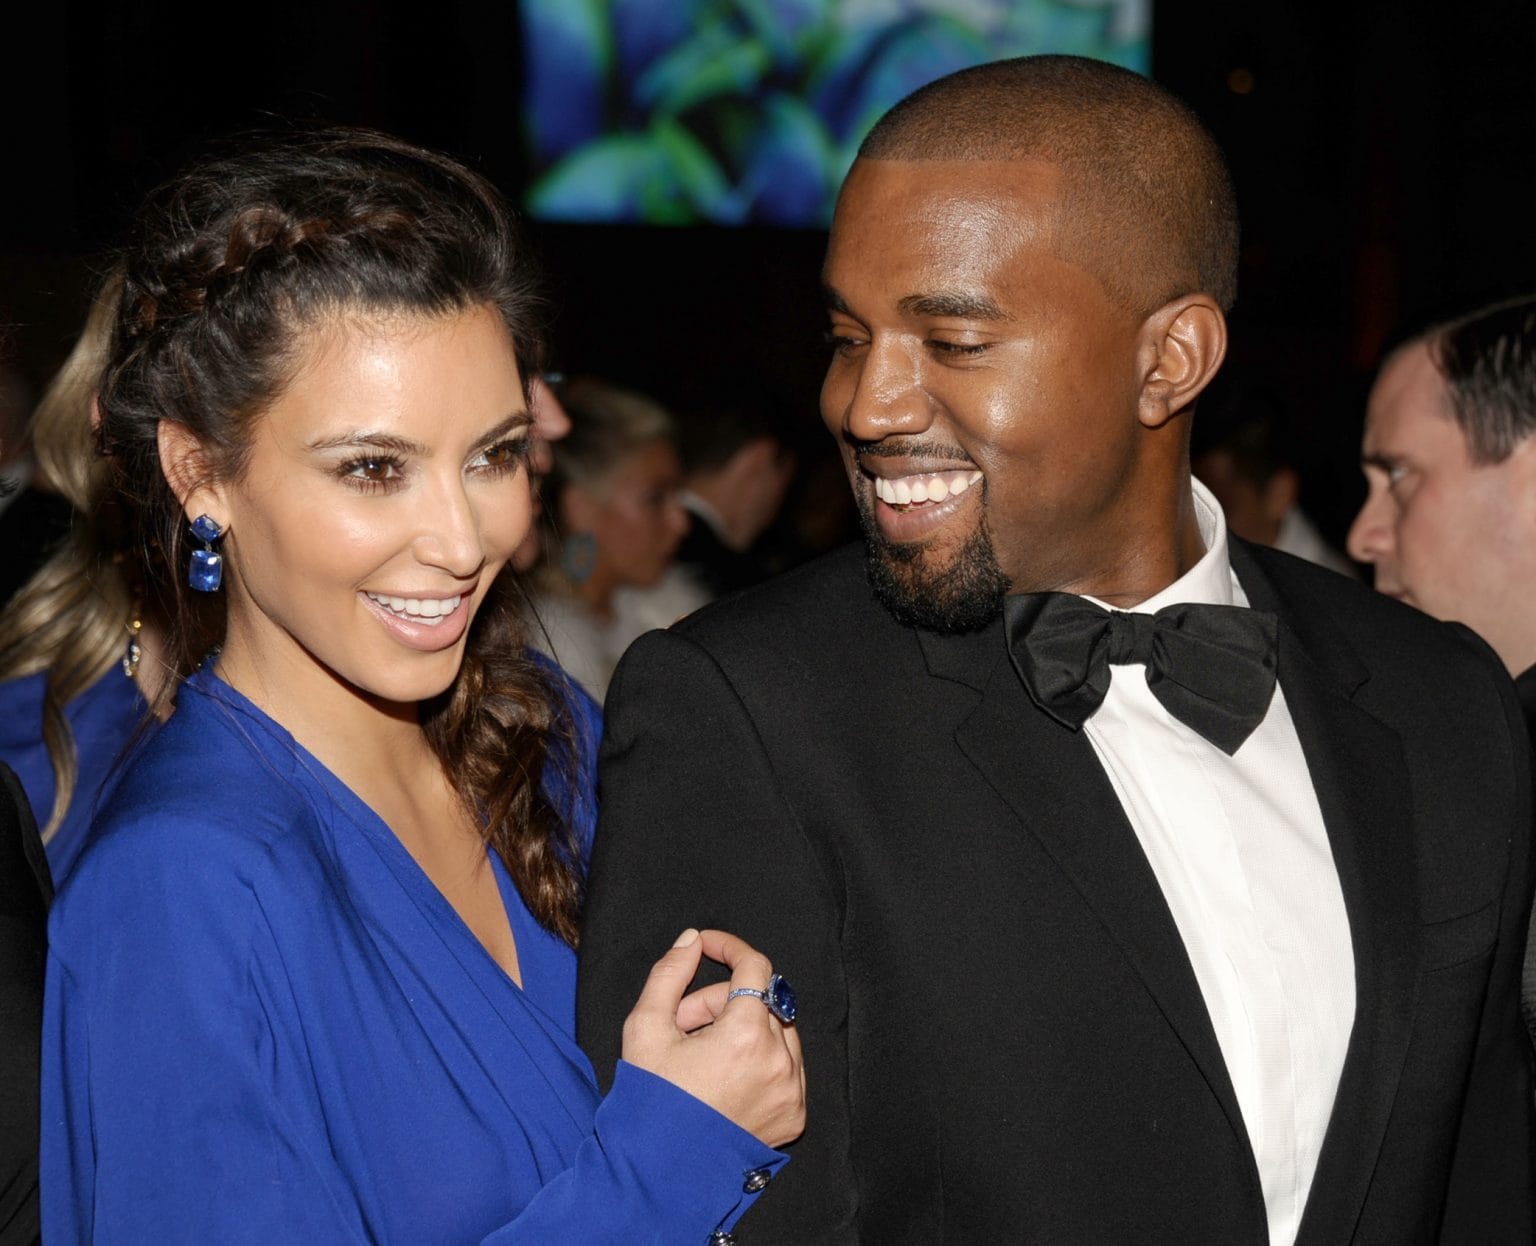 Kim Kardashian And Kanye West File For Divorce After Nearly 7 Years Of